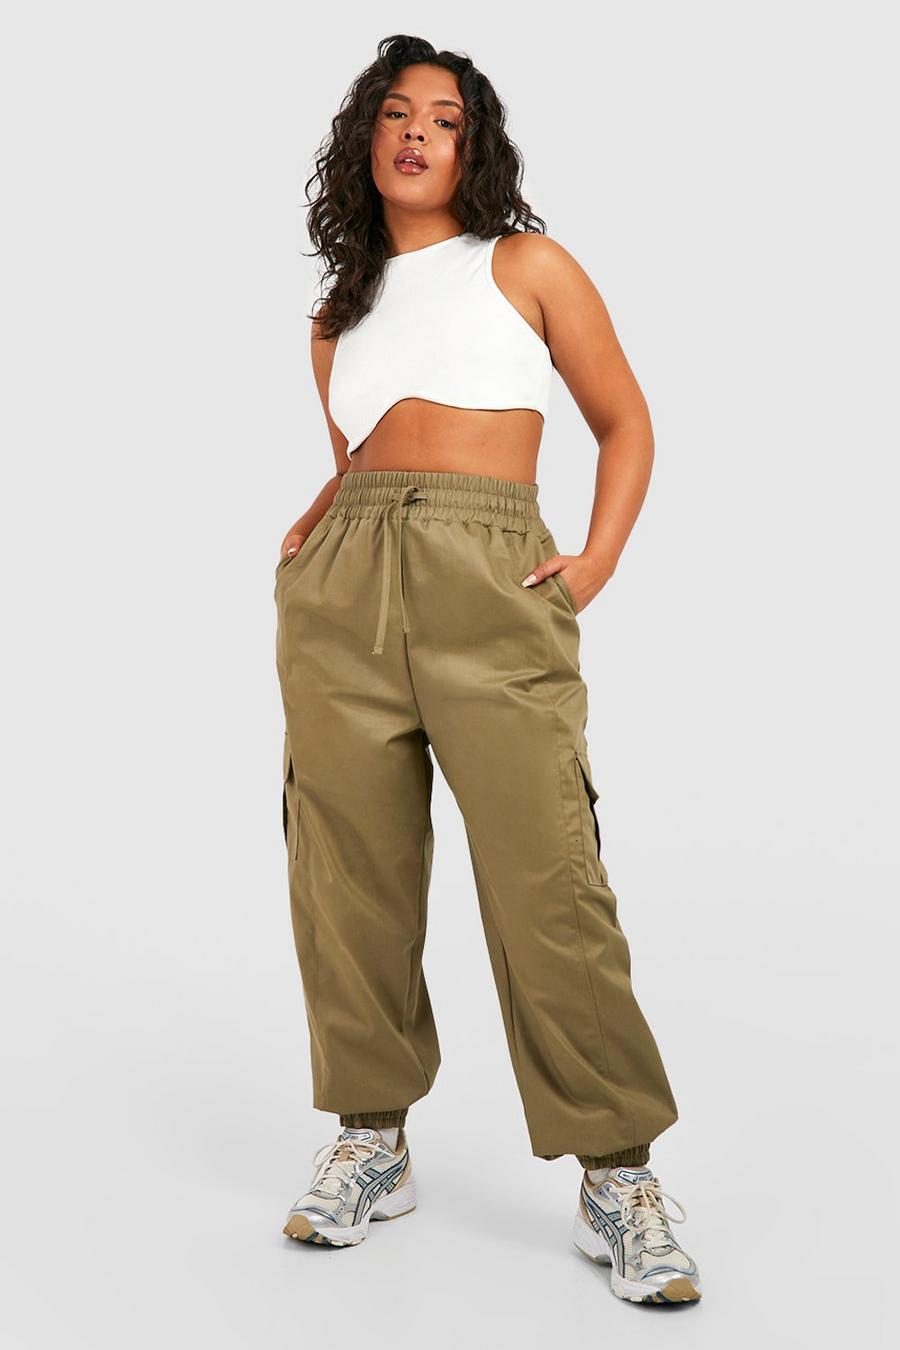 Women's sports trousers with cuffs